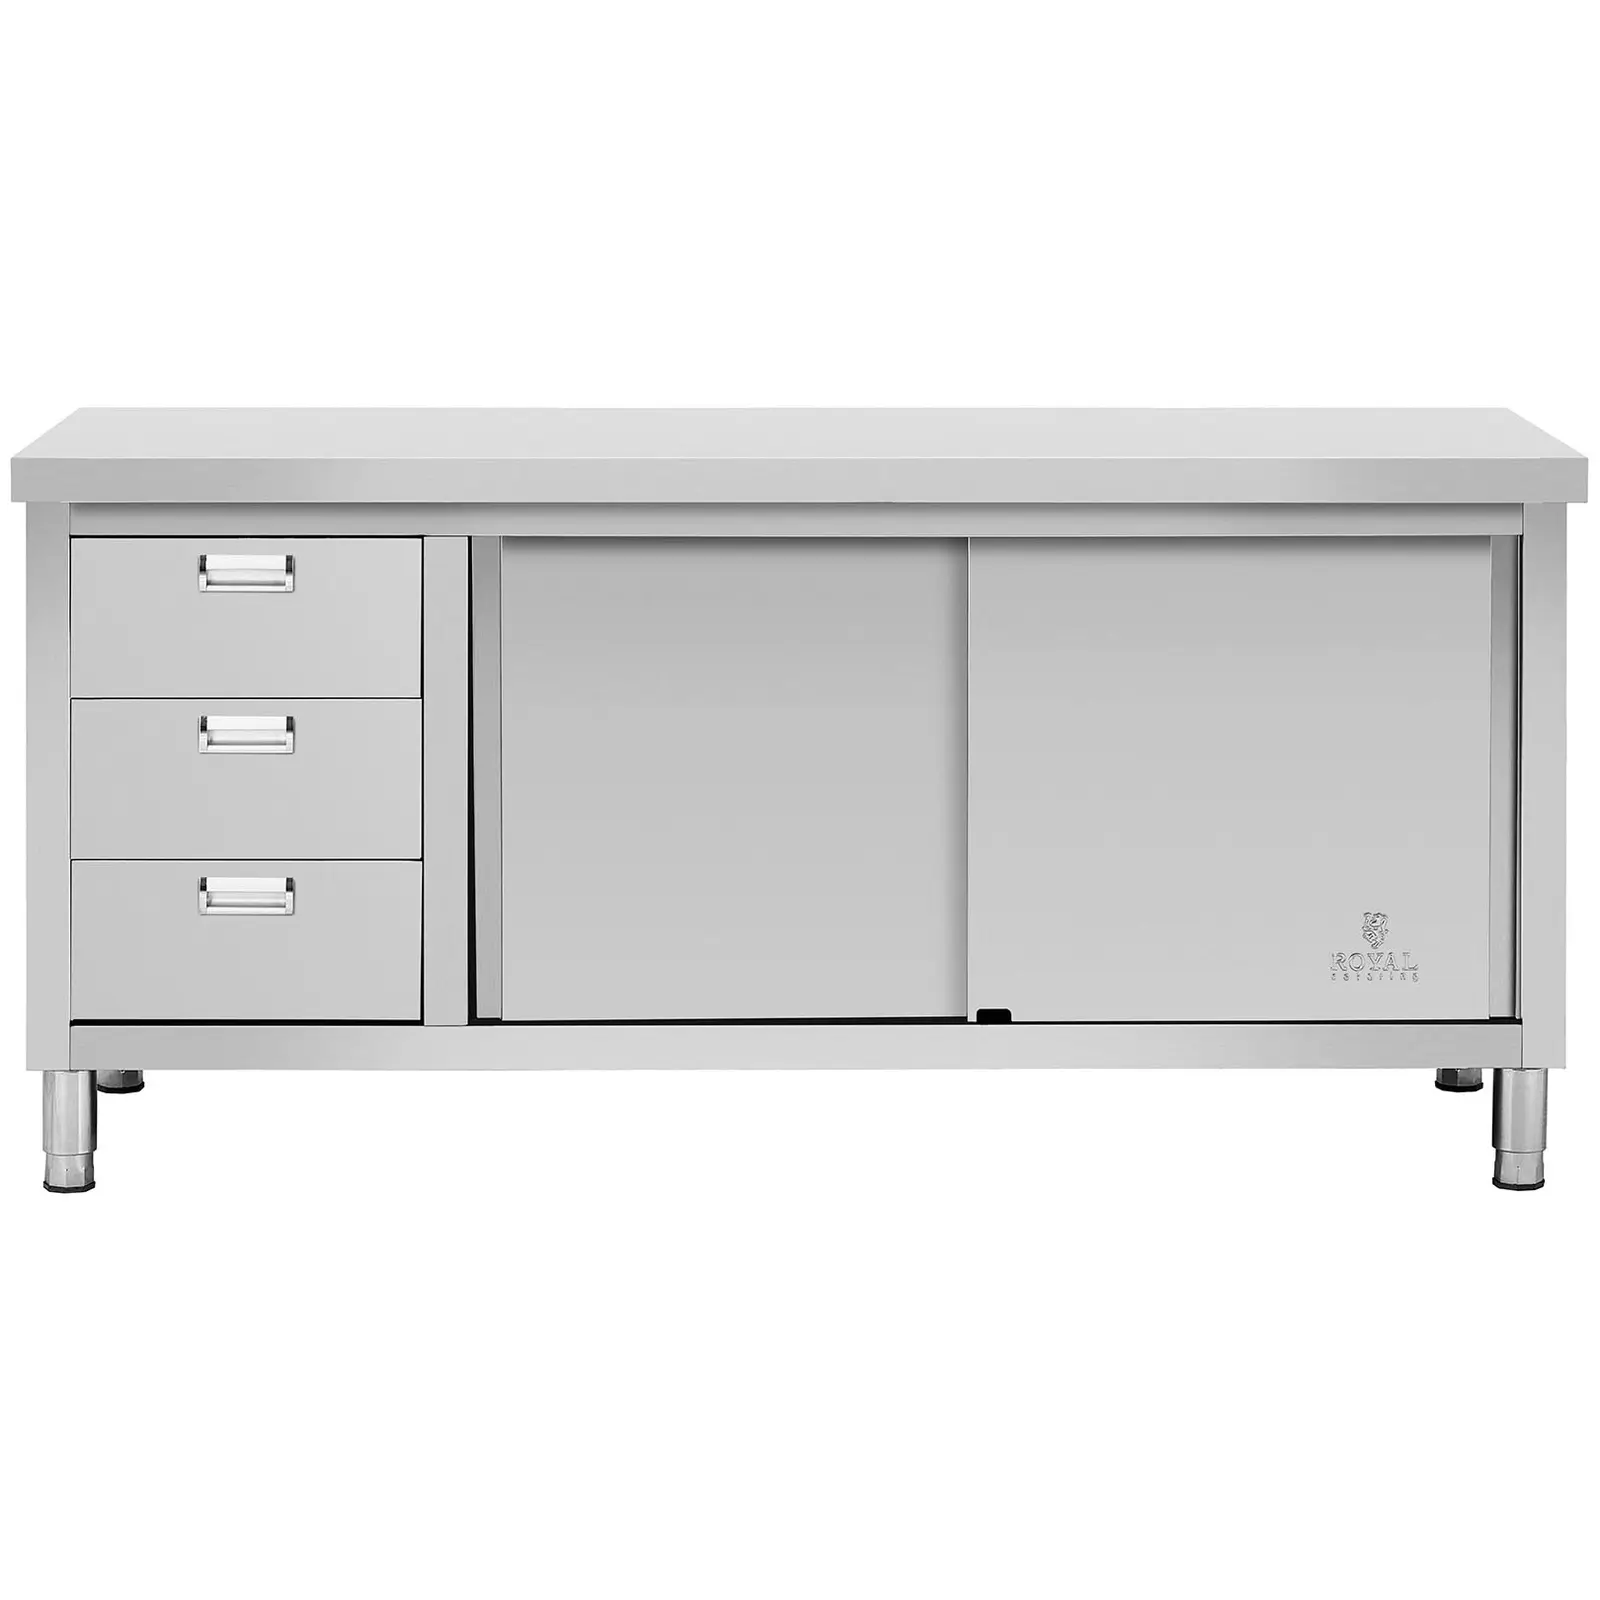 Work Cabinet - 180 x 70 x 85 cm - Royal Catering - 600 kg load capacity - 3 drawers